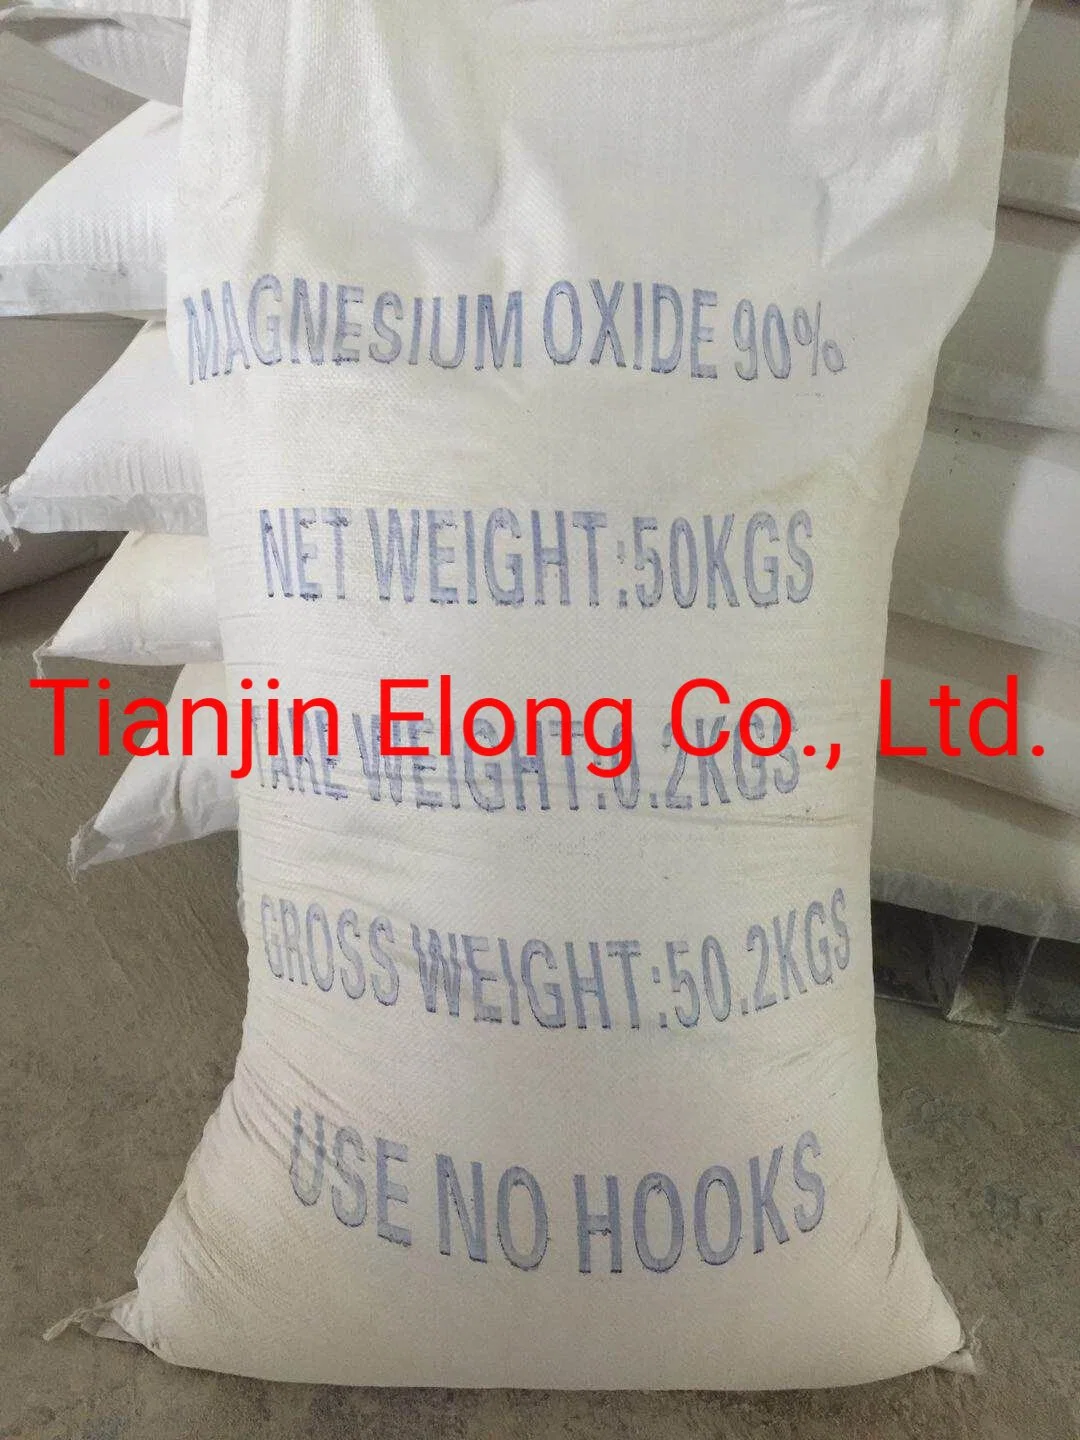 Hot Selling Magnesium Oxide CAS: 1309-48-4 with Good Price